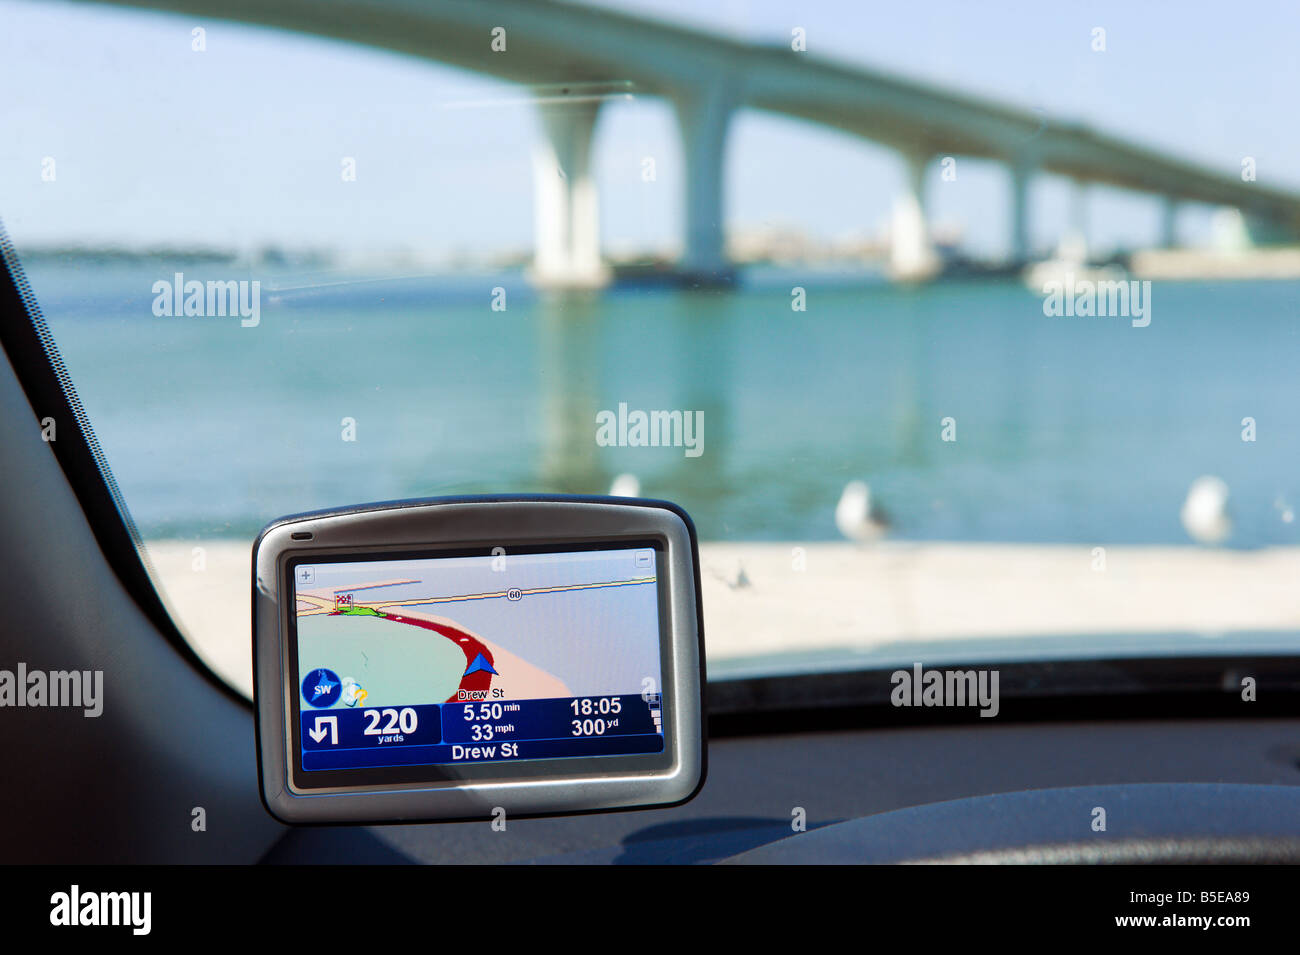 GPS Satellite Navigation System on the windscreen of a car in Clearwater, Florida, USA Stock Photo